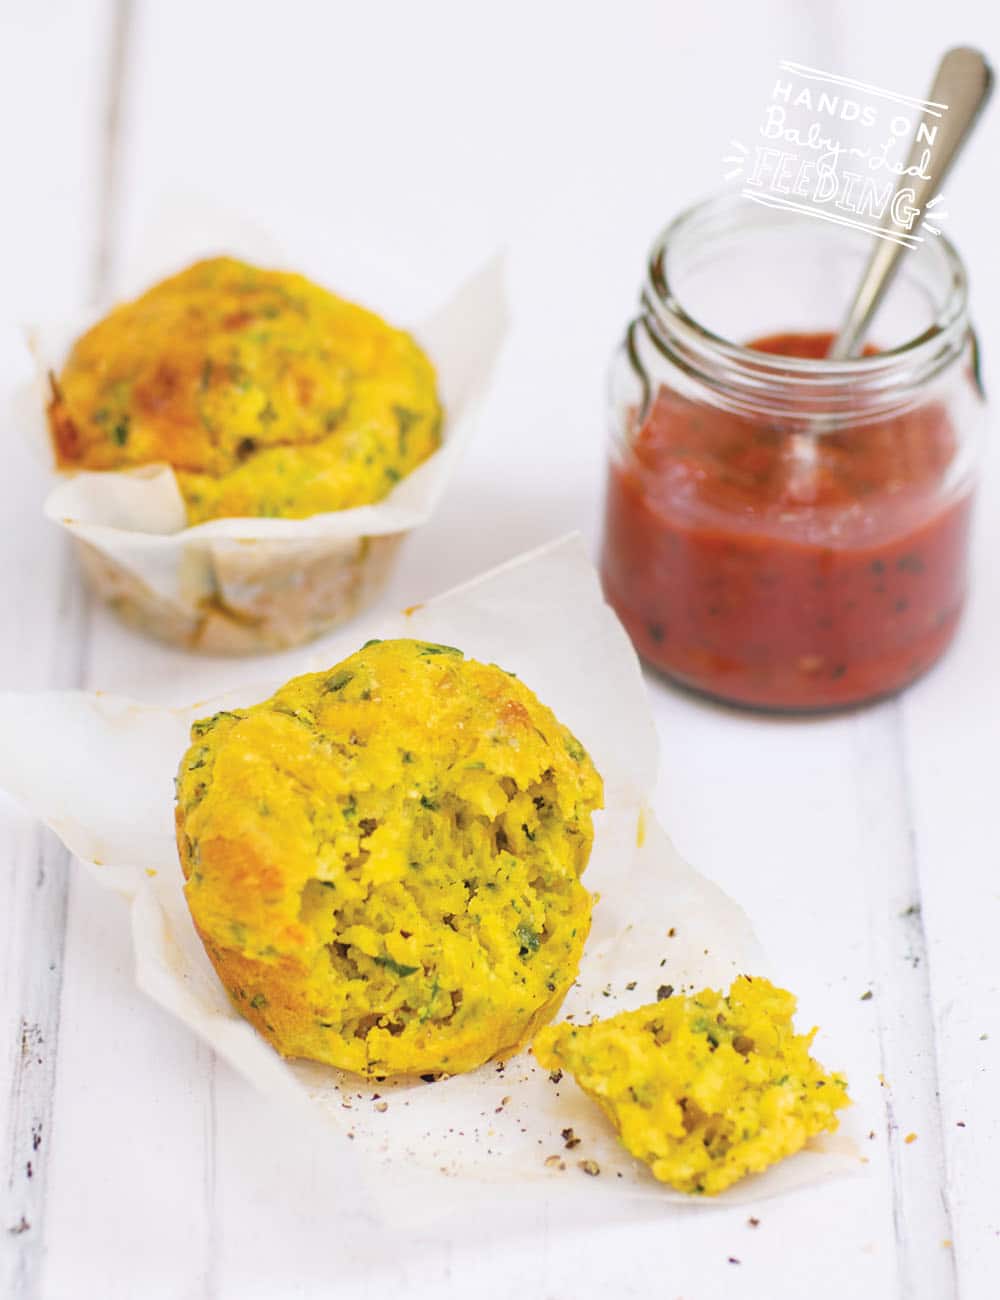 Veggie Muffins with Cheese for school lunches! Carrots, courgette (zucchini) , and spinach loaded muffins with cheddar cheese. Make ahead and freeze for an easy lunchbox idea! Safe for baby led weaning, toddlers, and all picky eaters! #veggiemuffins #savourymuffins #lunchbox #backtoschool #healthylunch